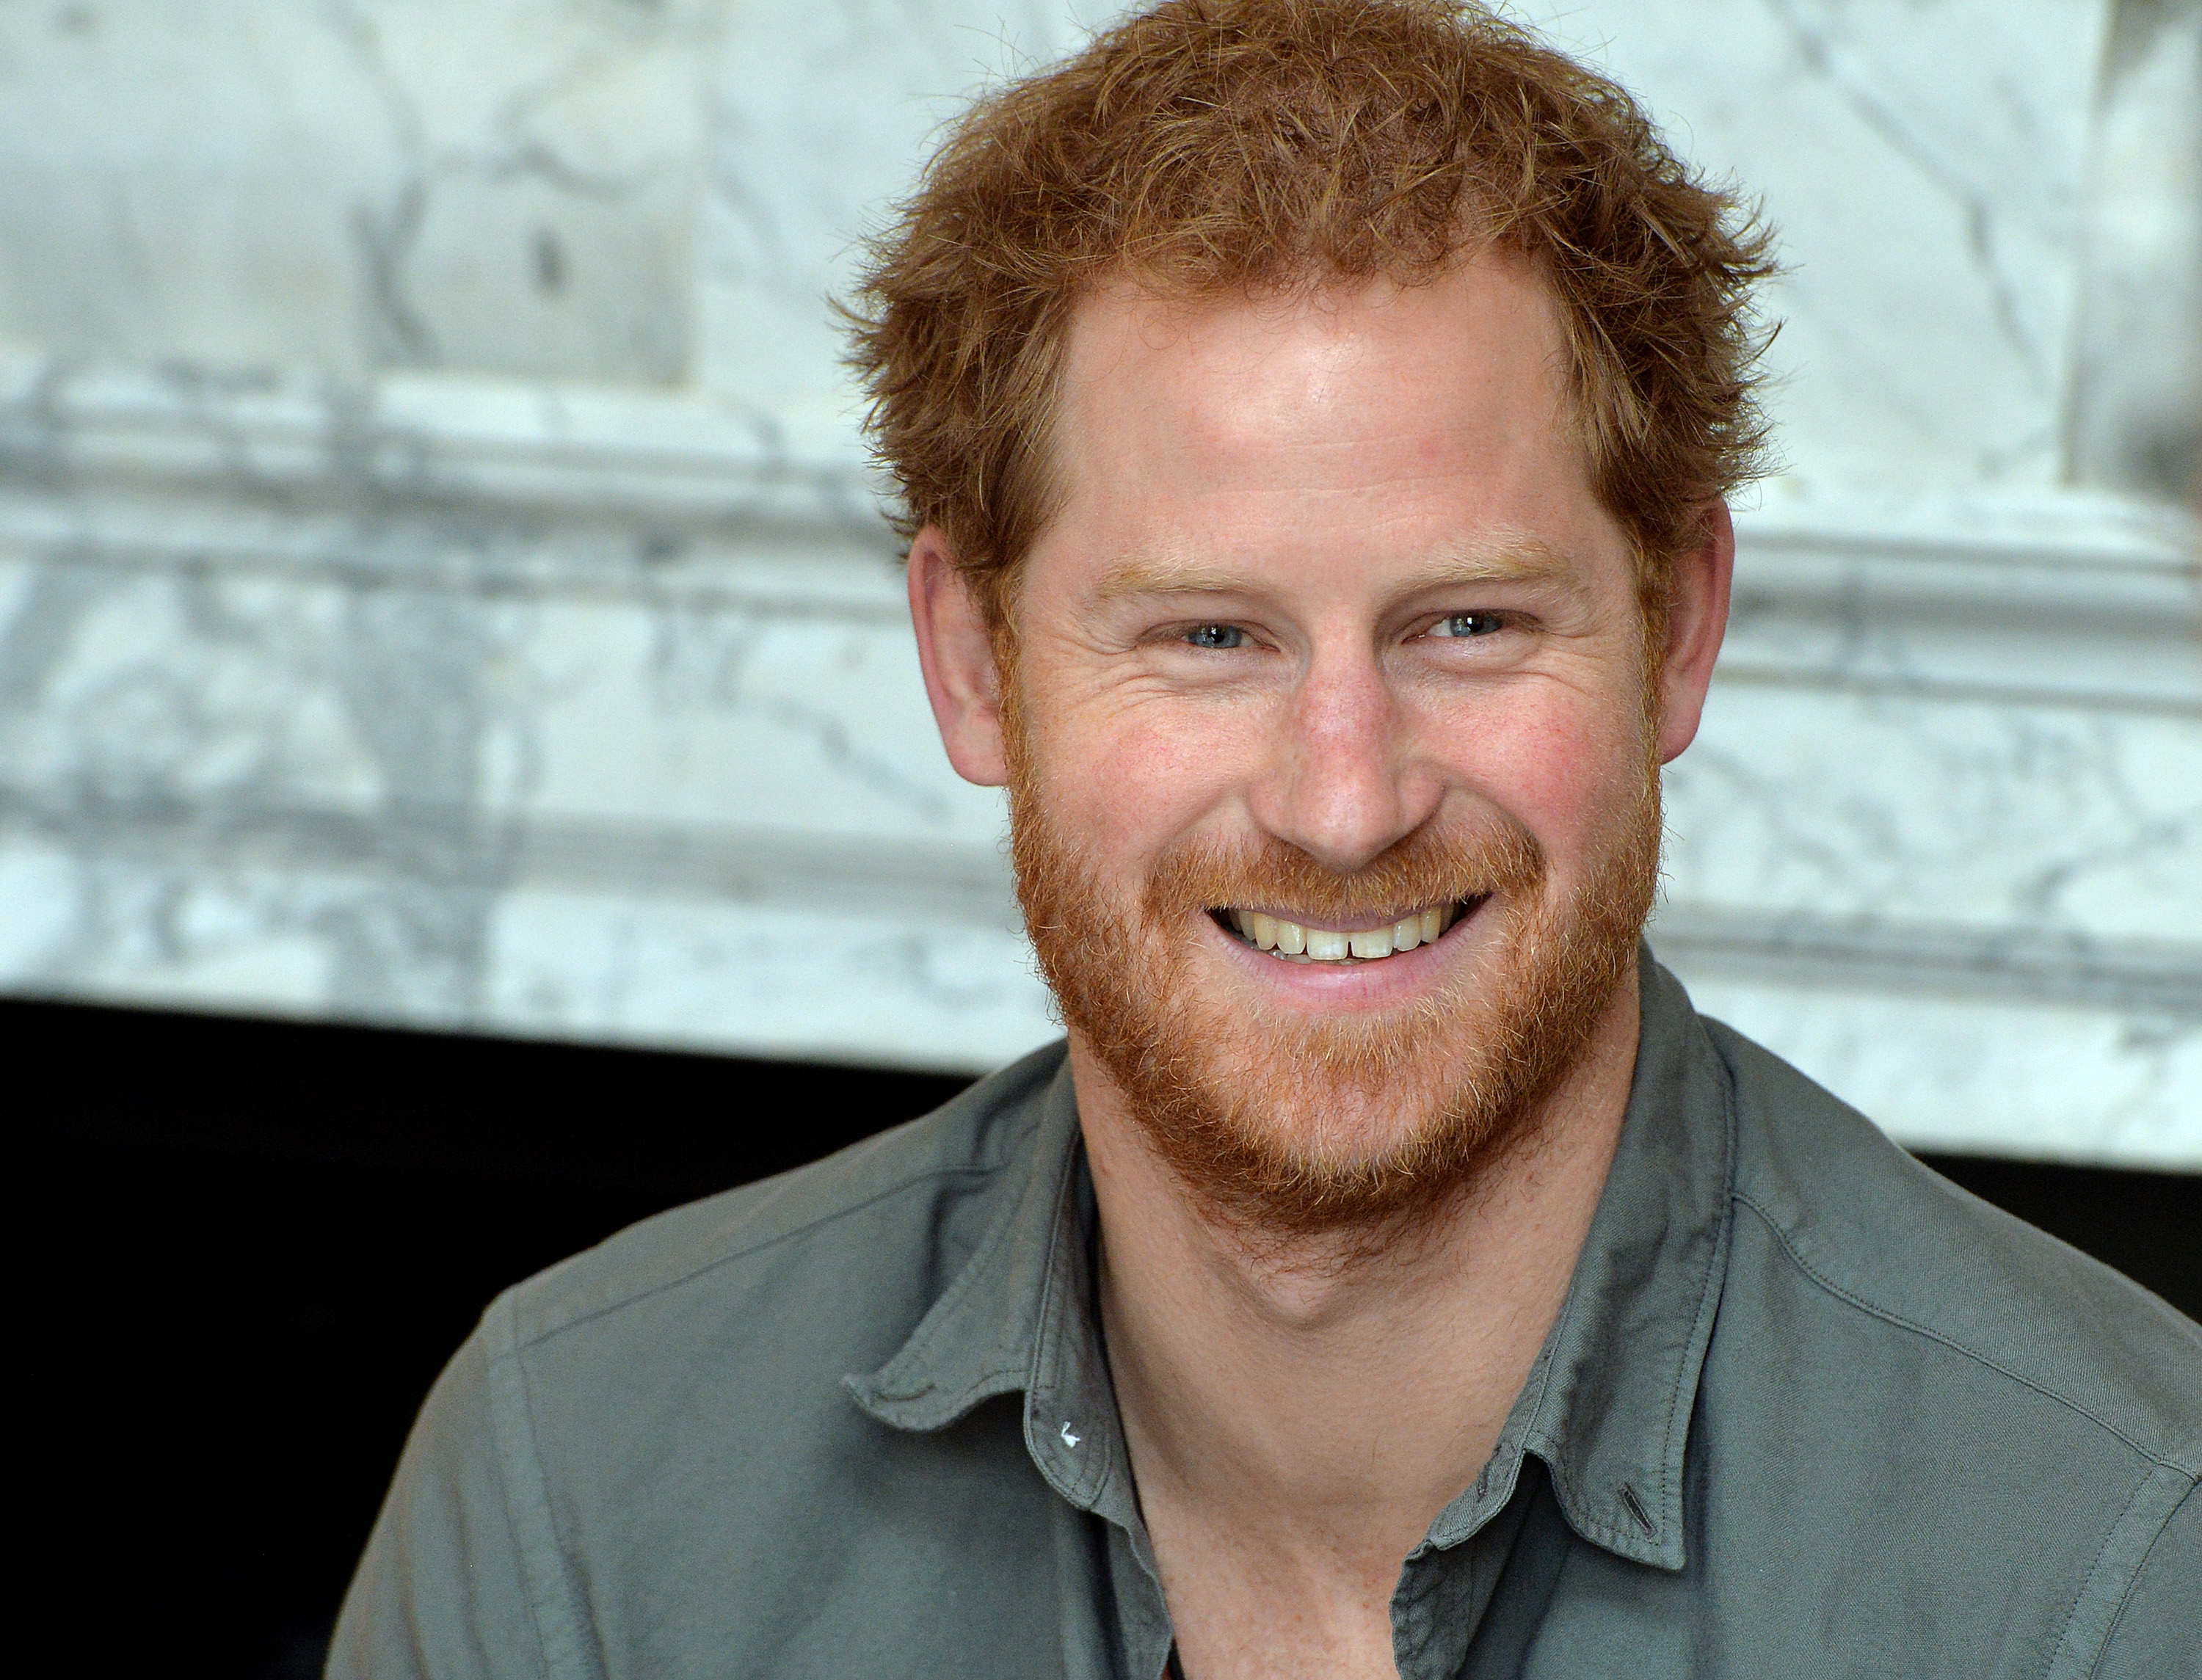 Prince Harry Attends MapAction Briefing Ahead Of Nepal Tour